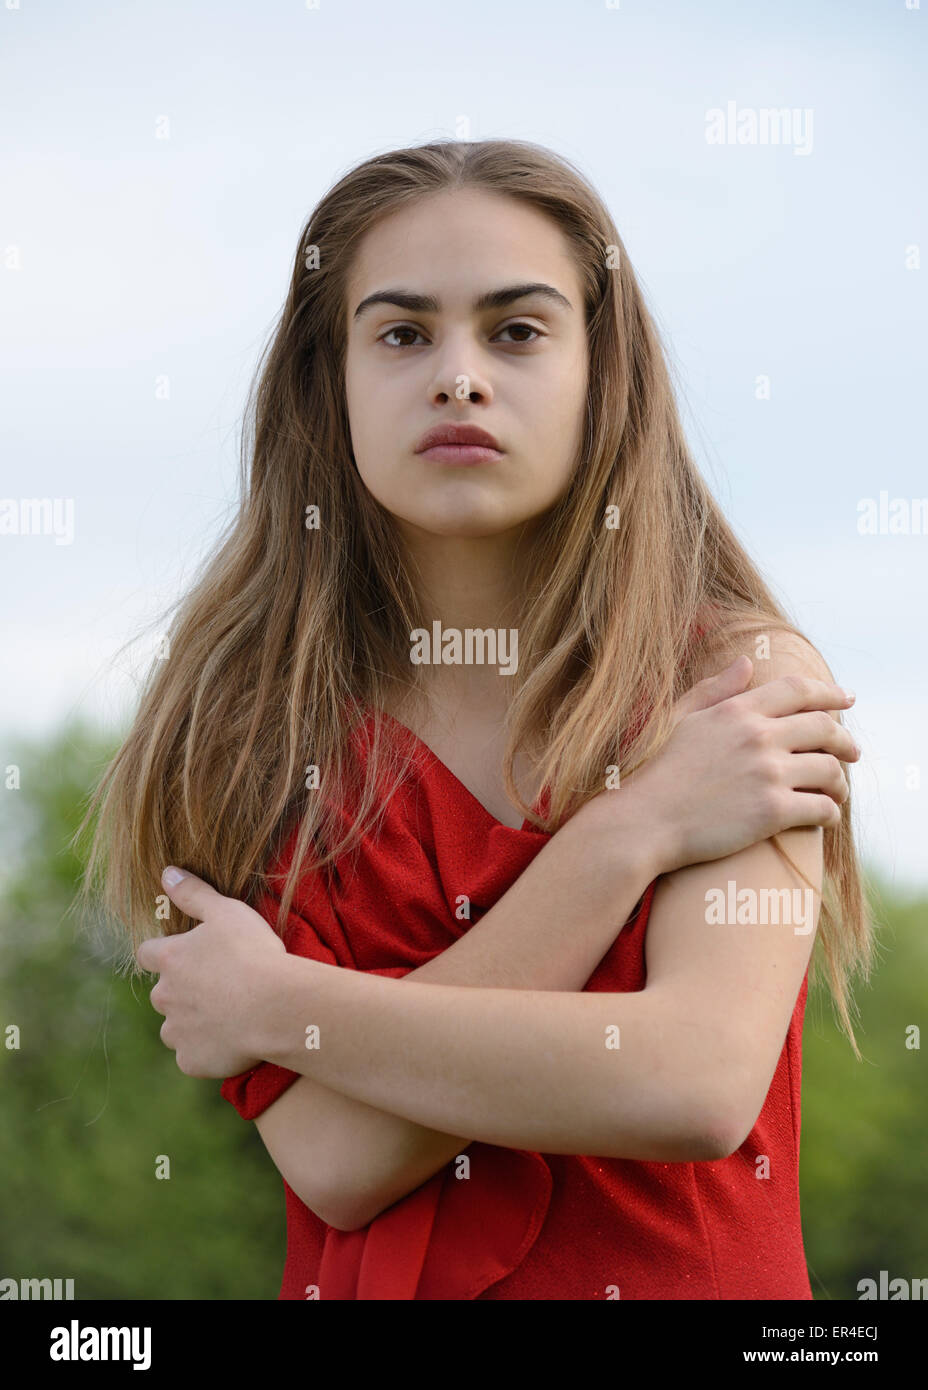 strong beauty, woman in red Stock Photo